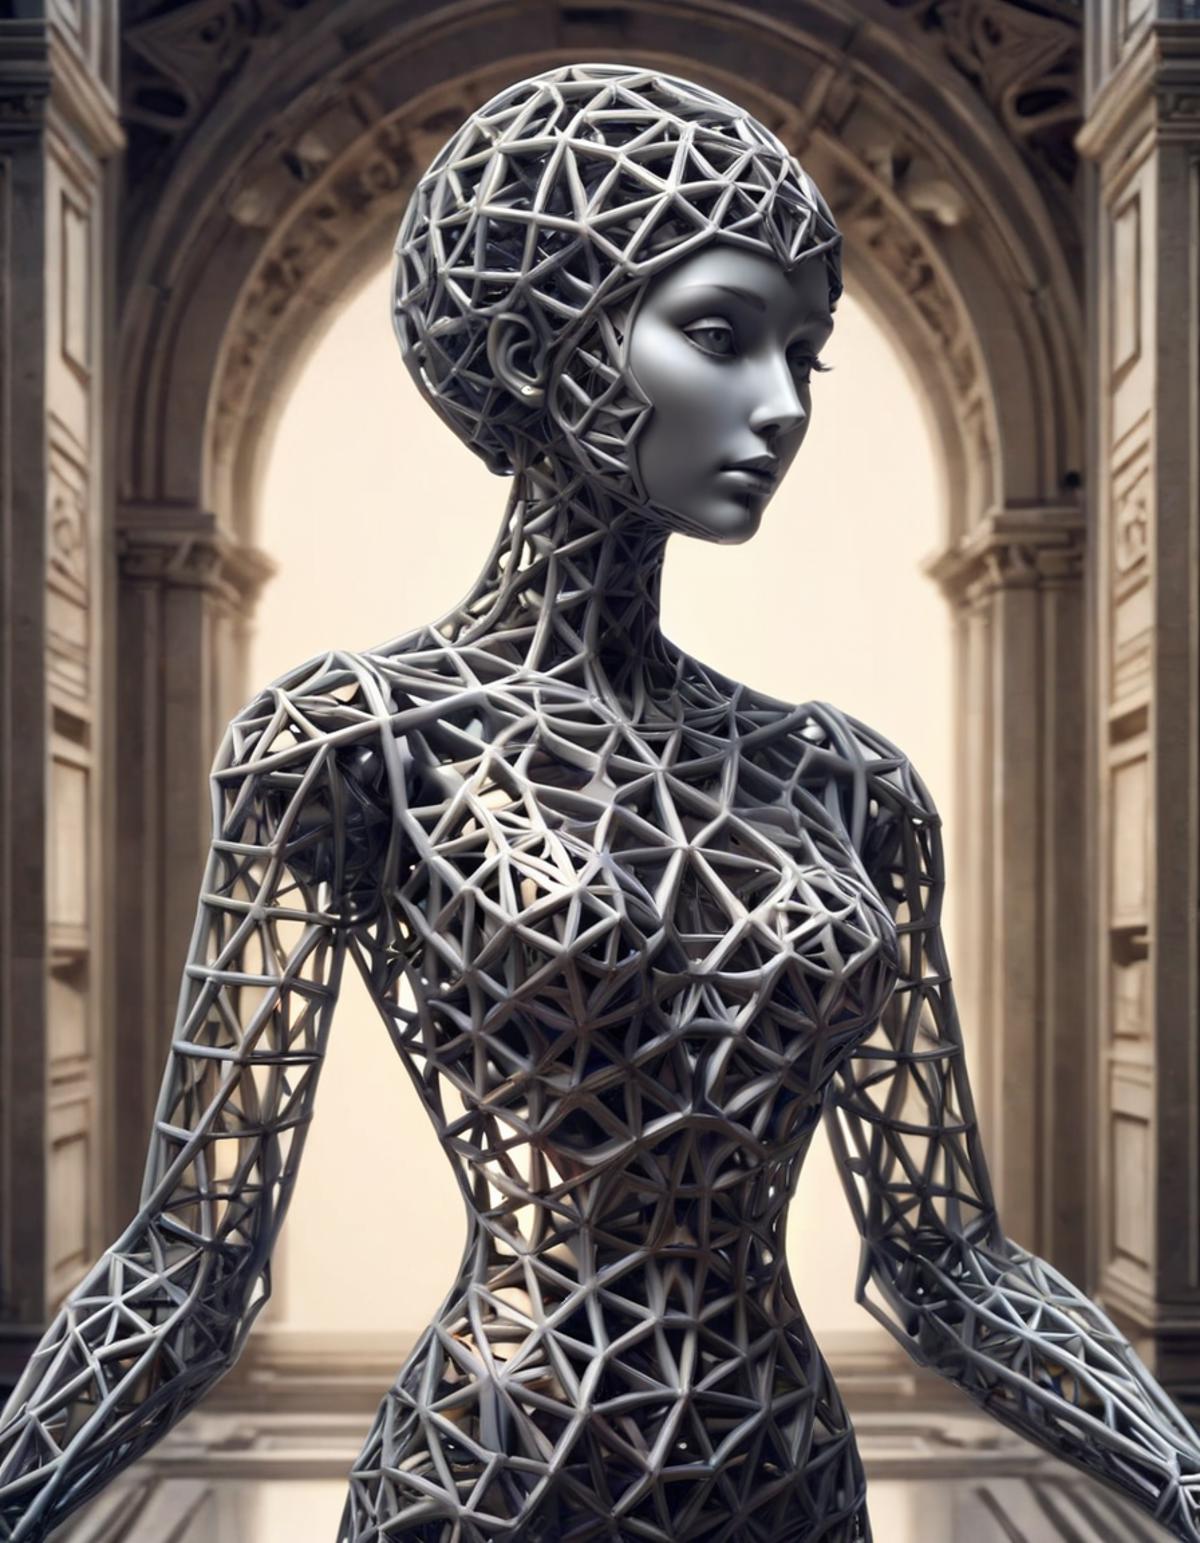 A life-size wire sculpture of a woman wearing a geometric headpiece.